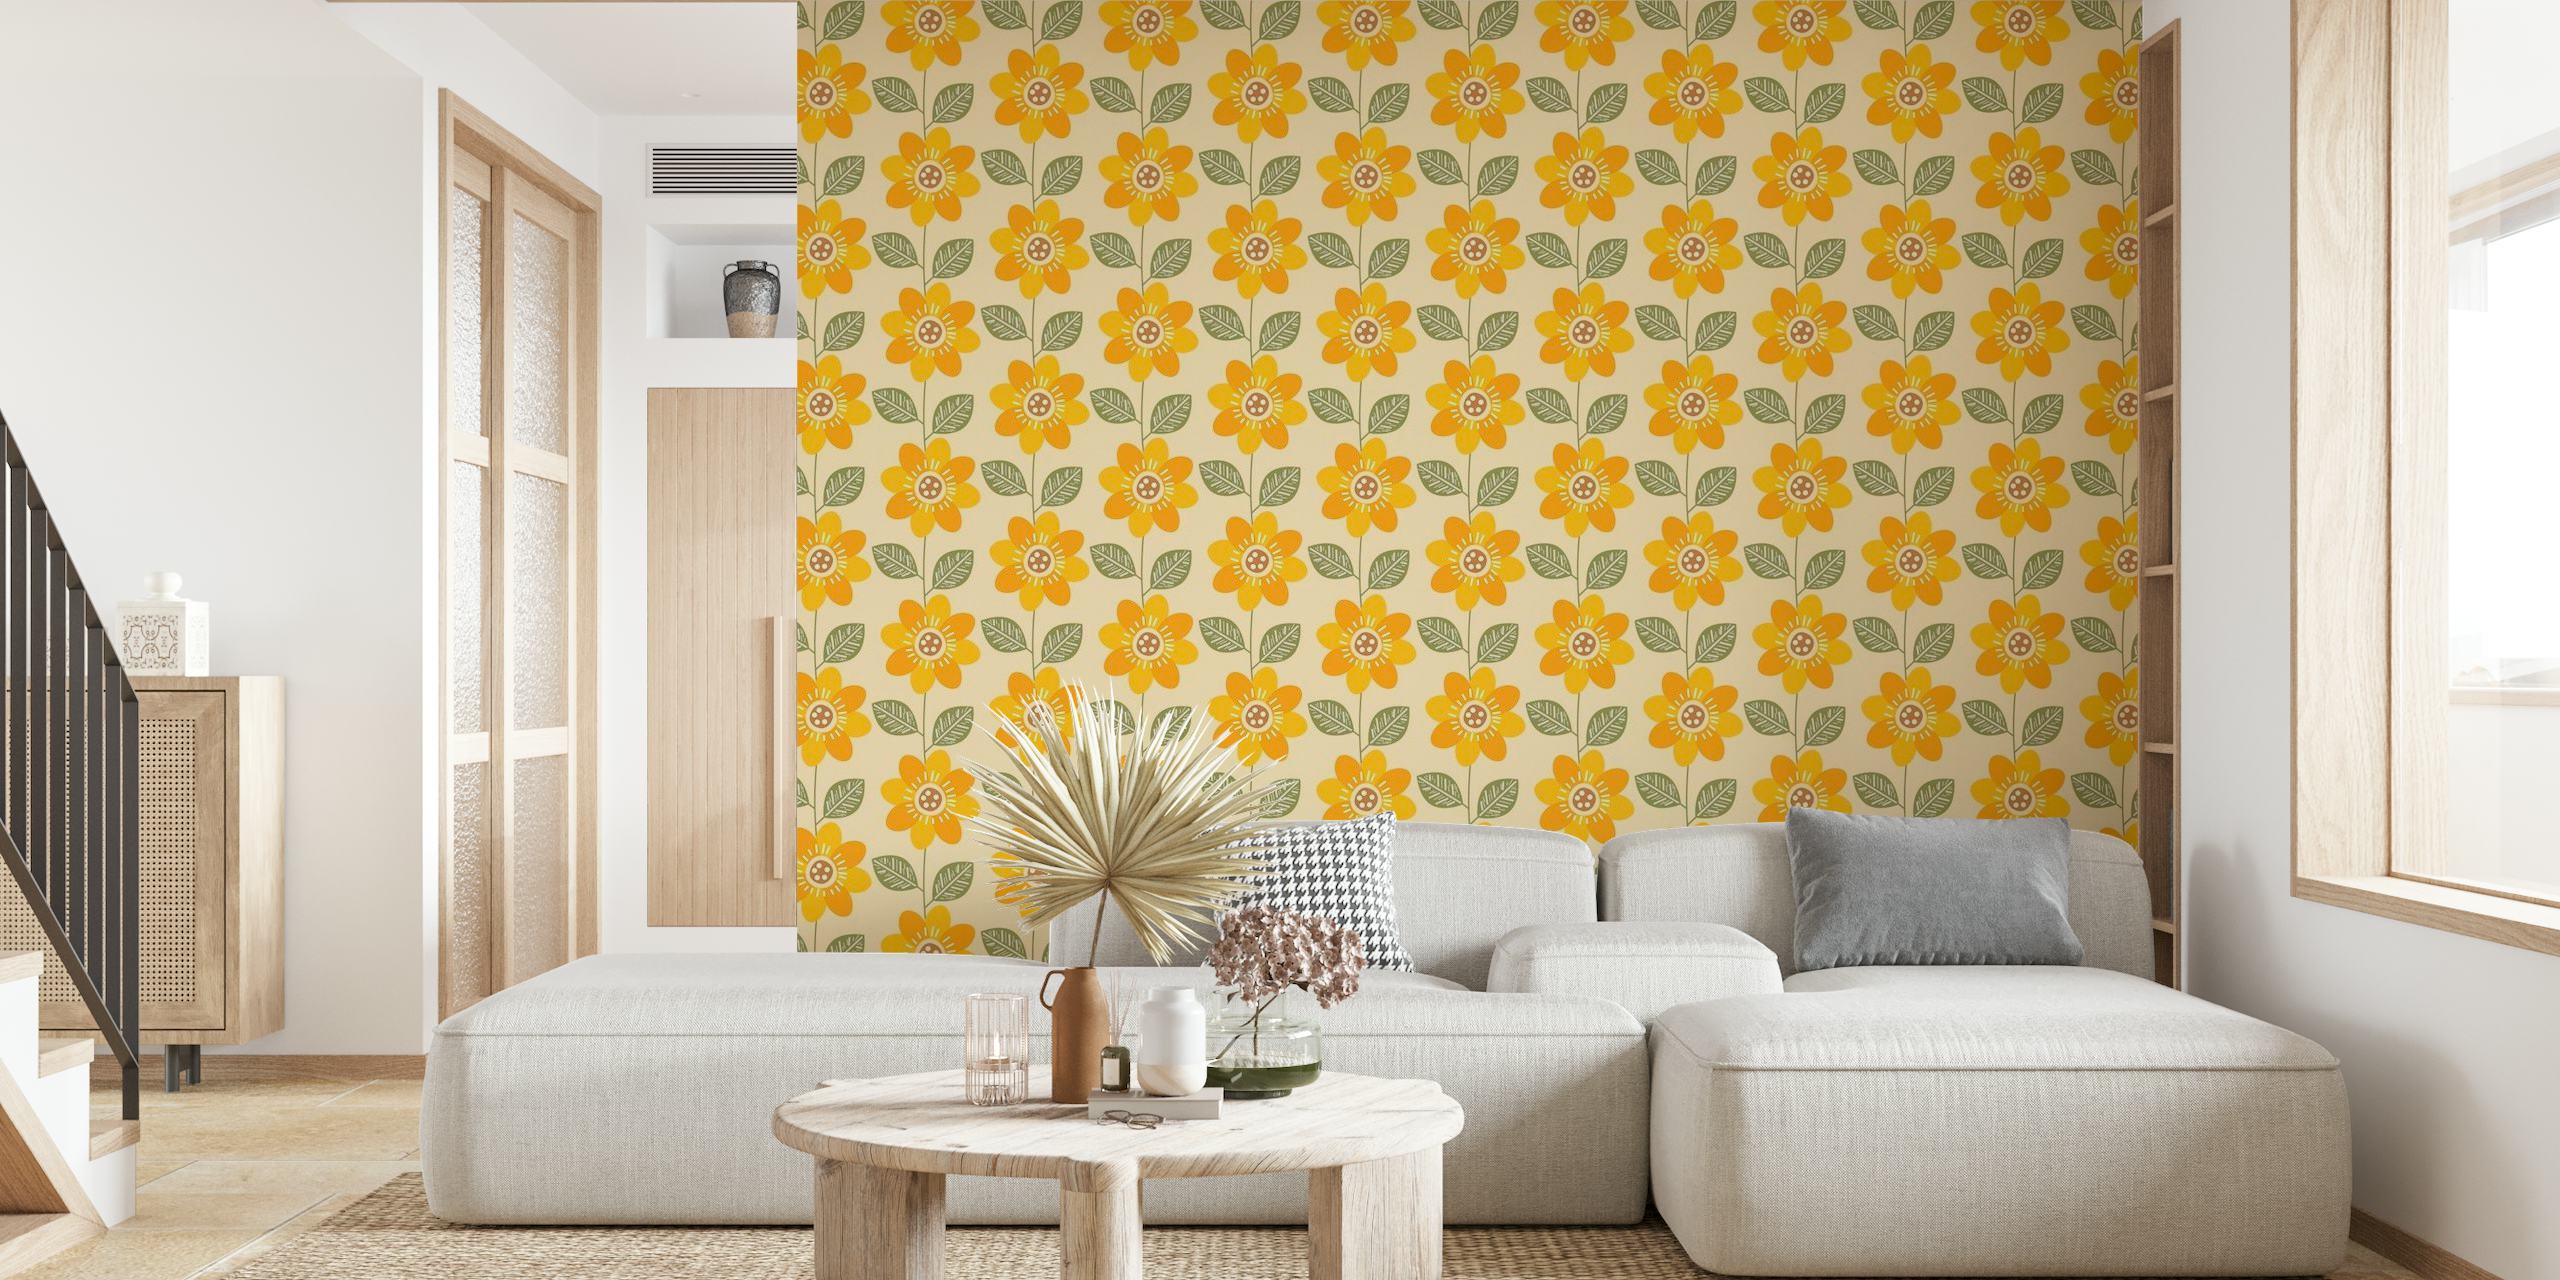 Sunflower Pattern wall mural with bright yellow flowers and green accents on a neutral background